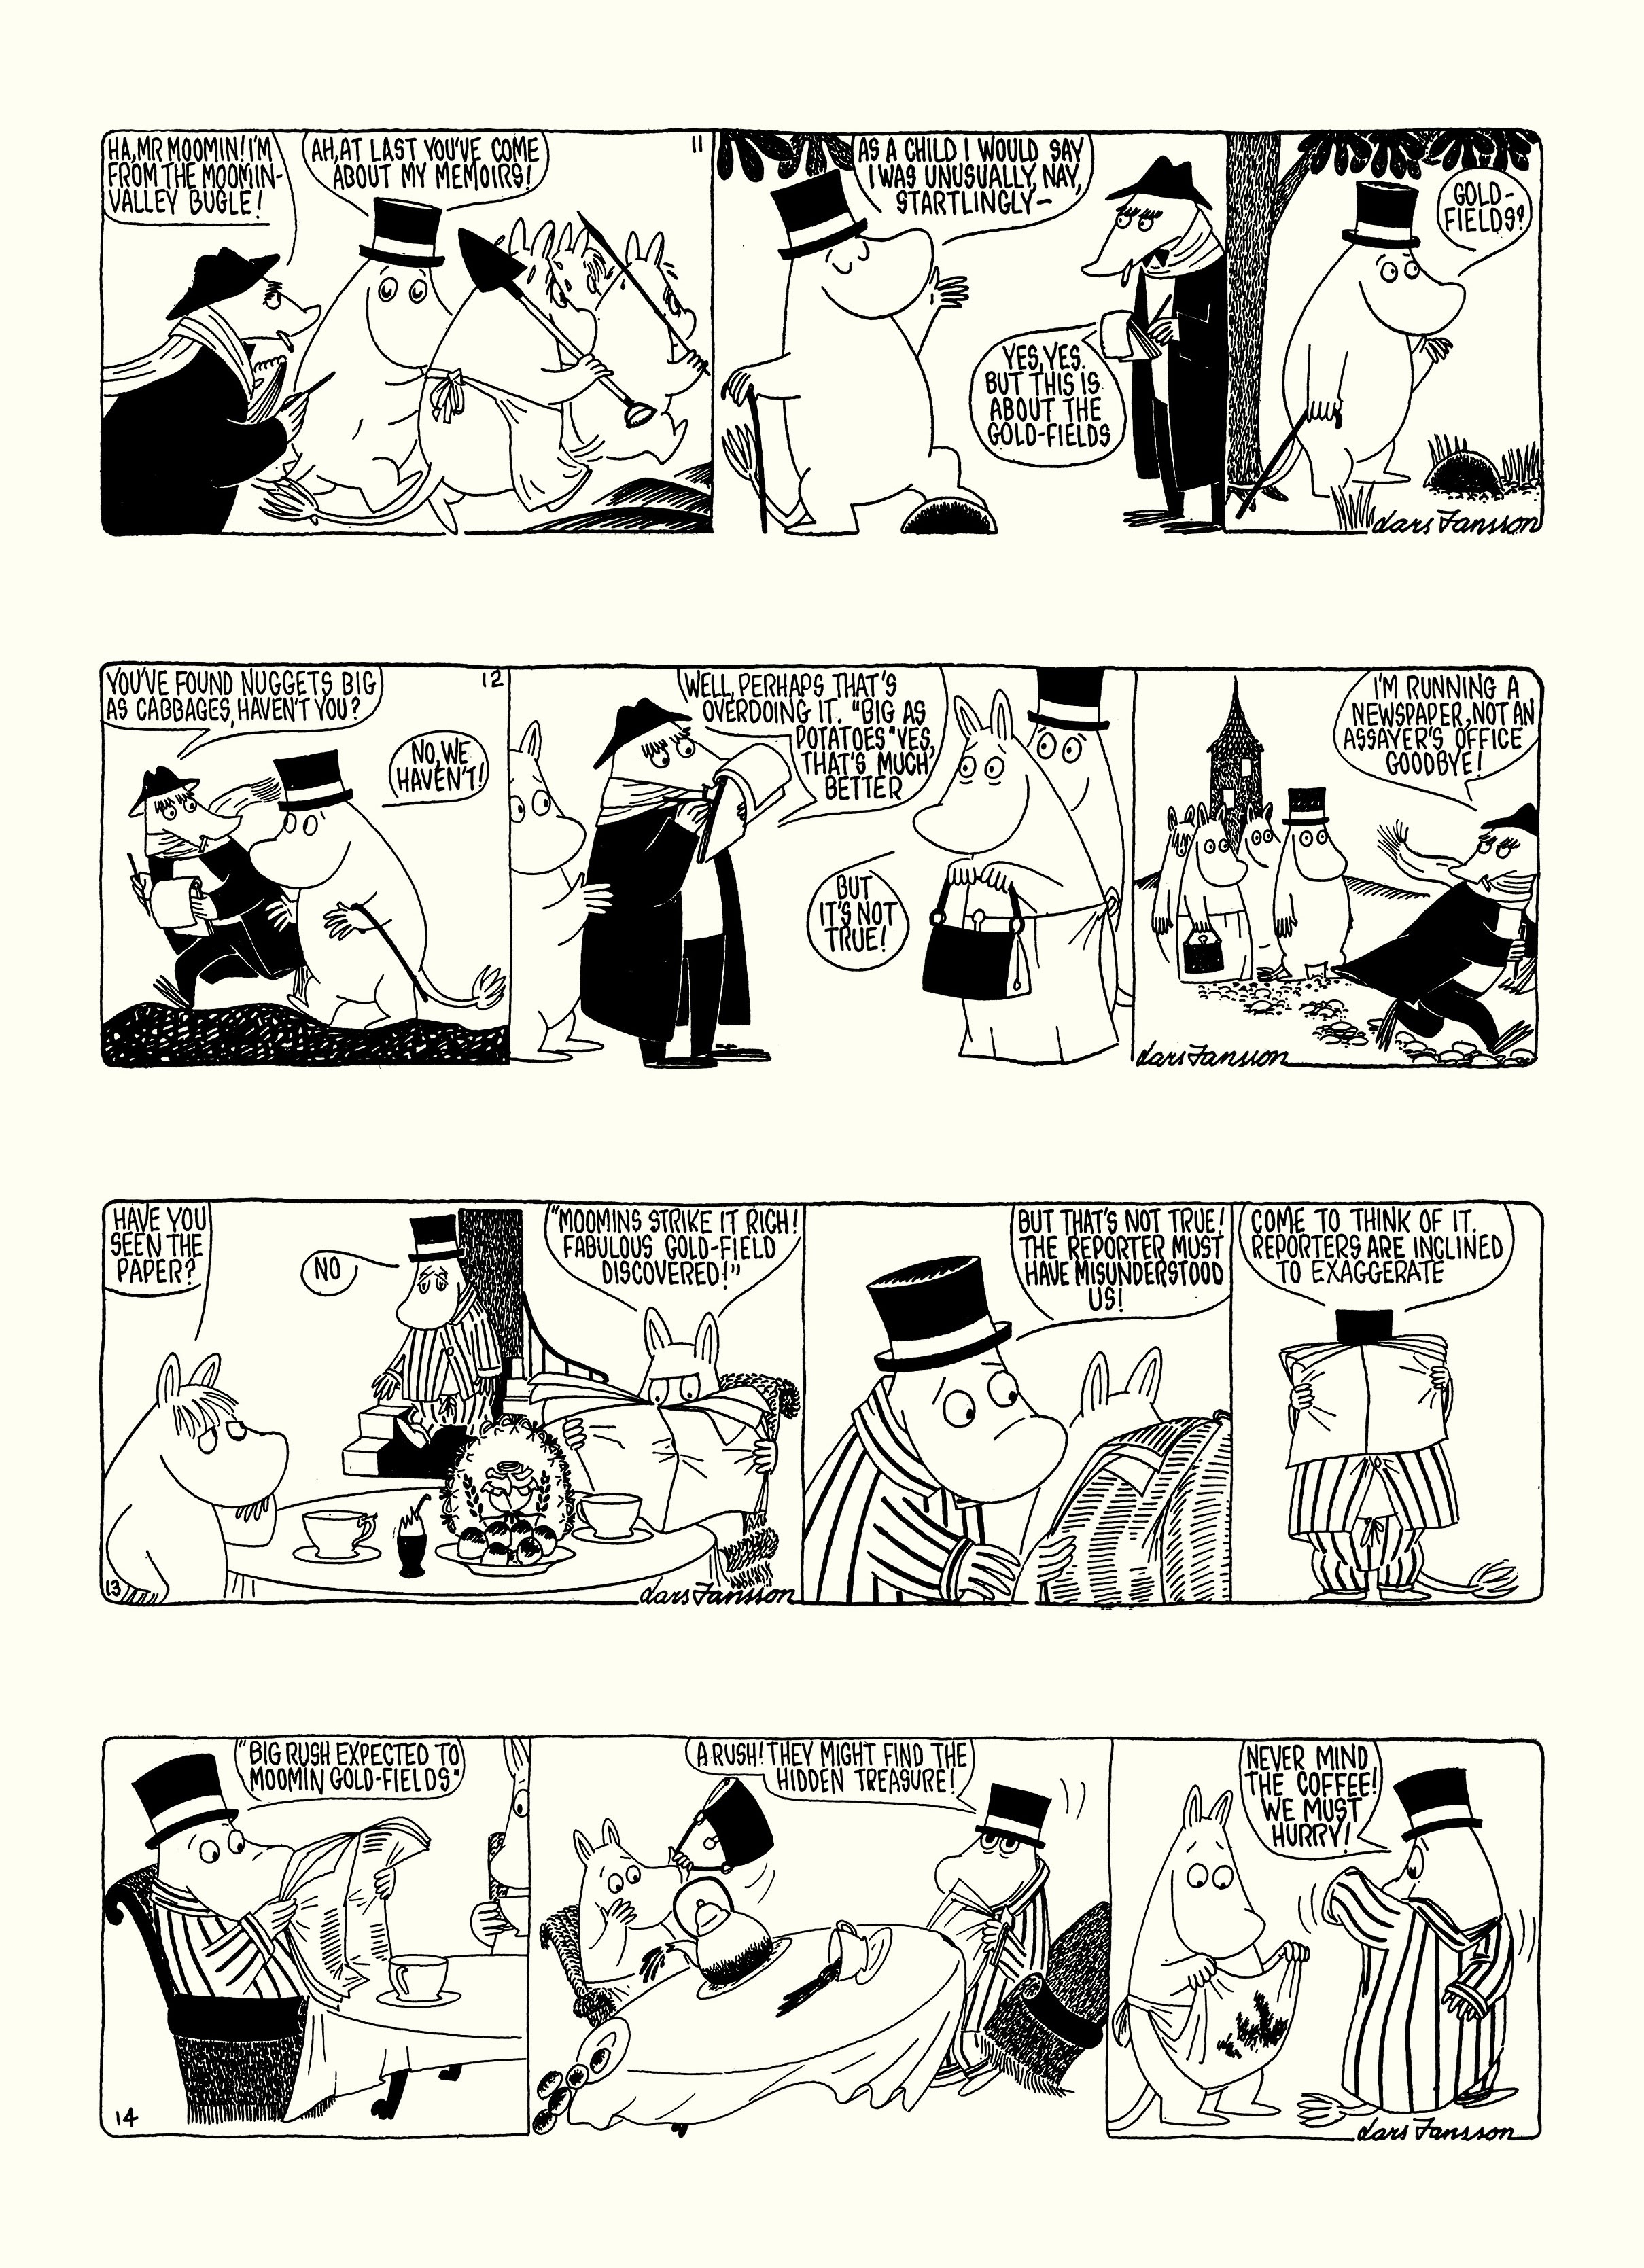 Read online Moomin: The Complete Lars Jansson Comic Strip comic -  Issue # TPB 7 - 72